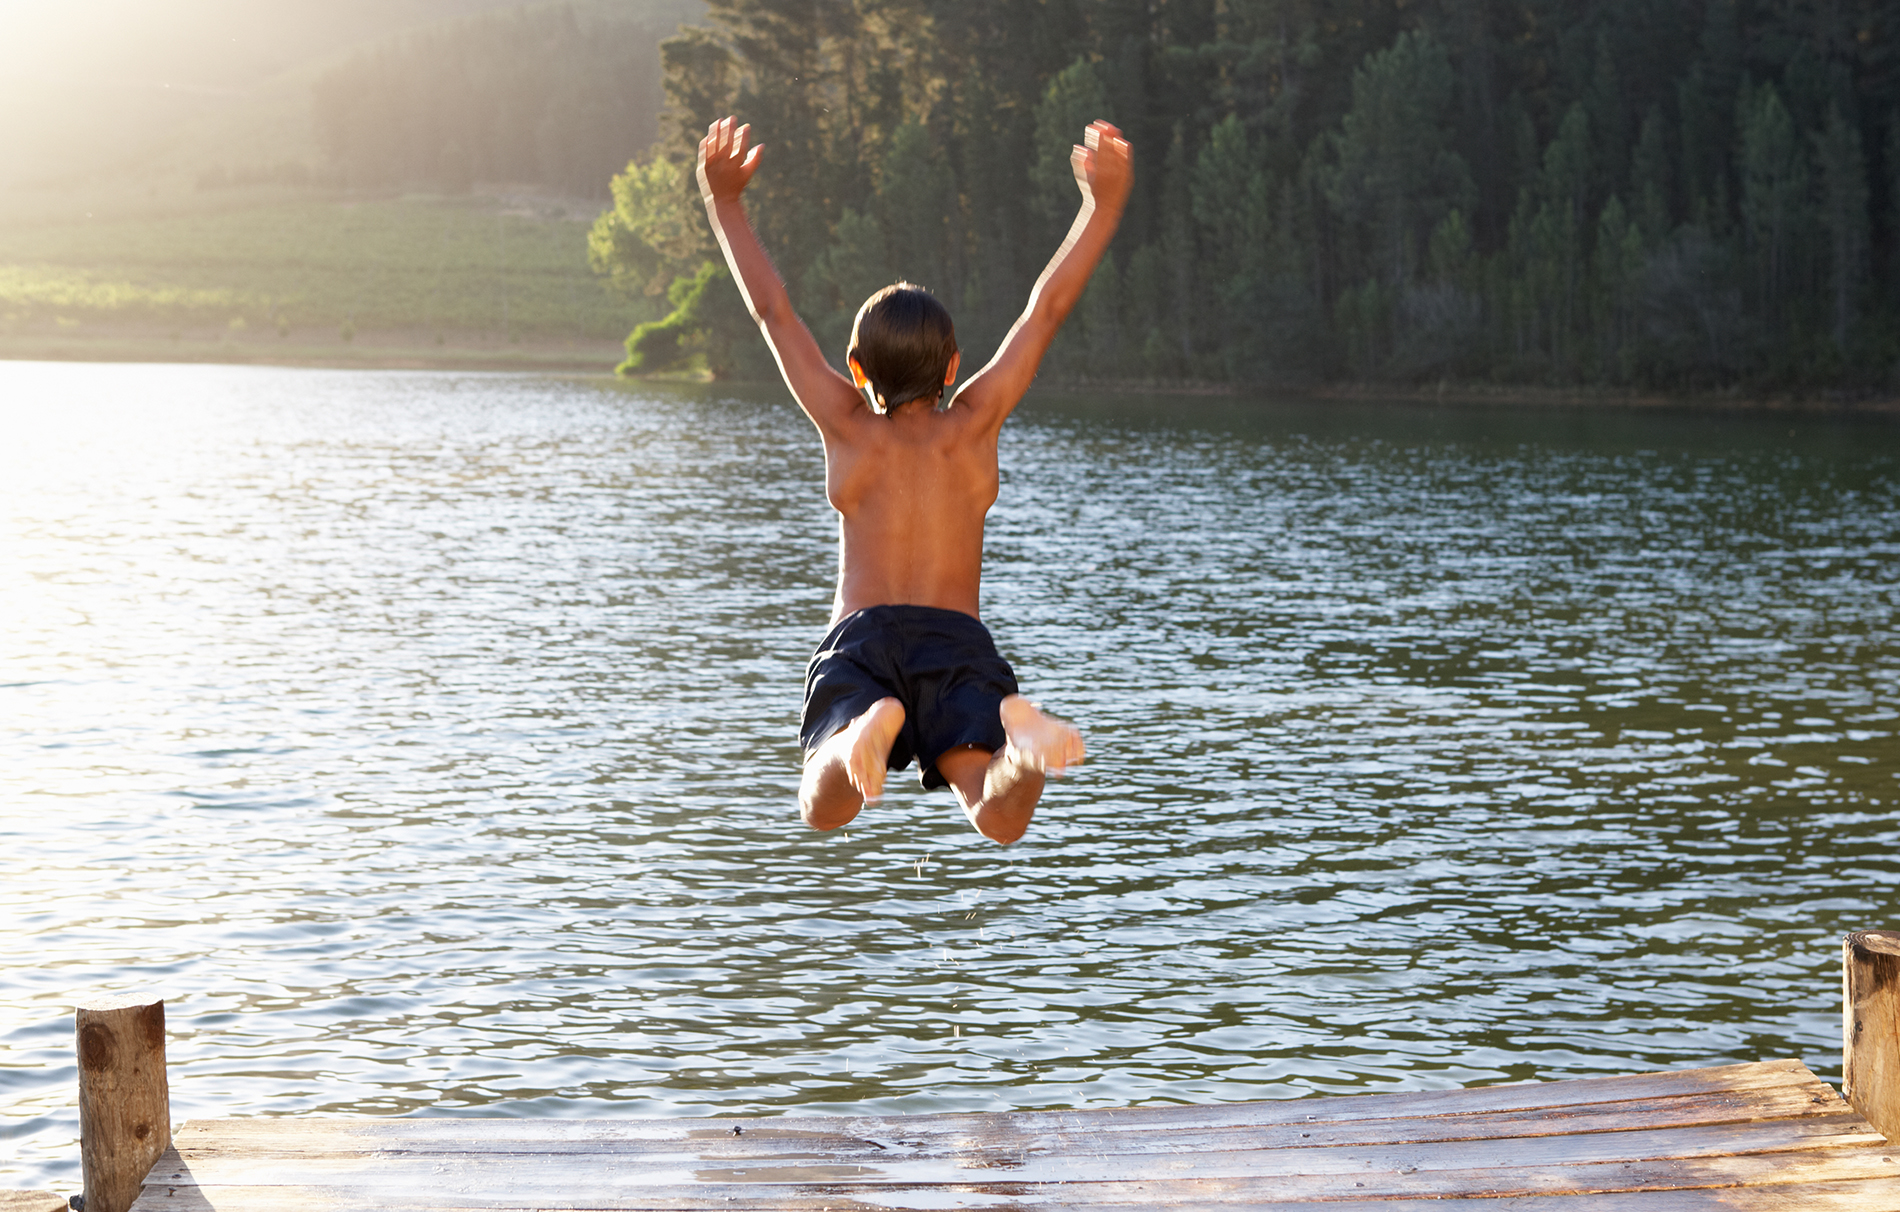 Boy jumping off dock into lake